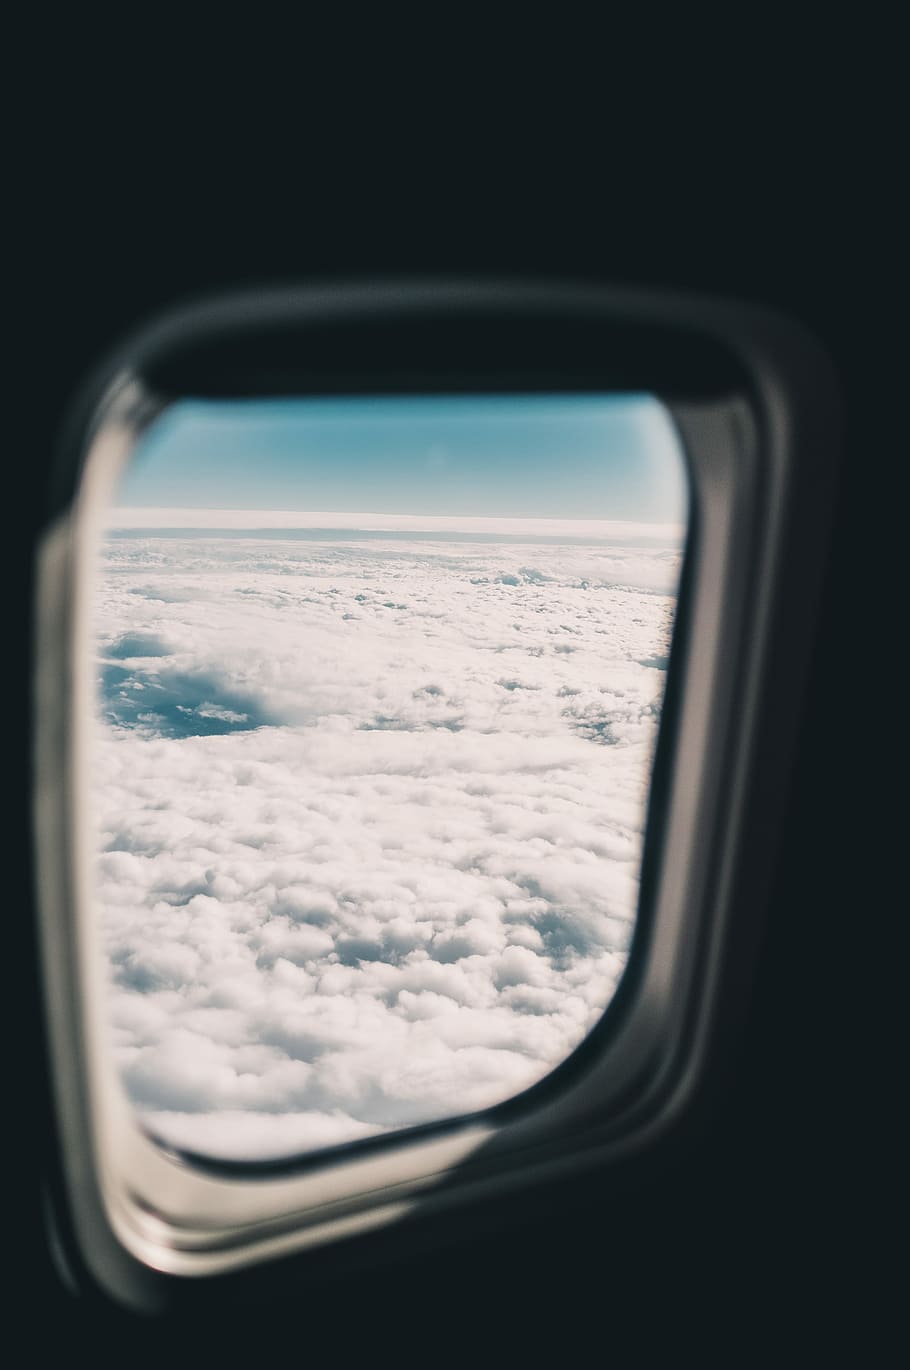 white clouds, clear glass plane mirror showing white clouds, window, HD wallpaper